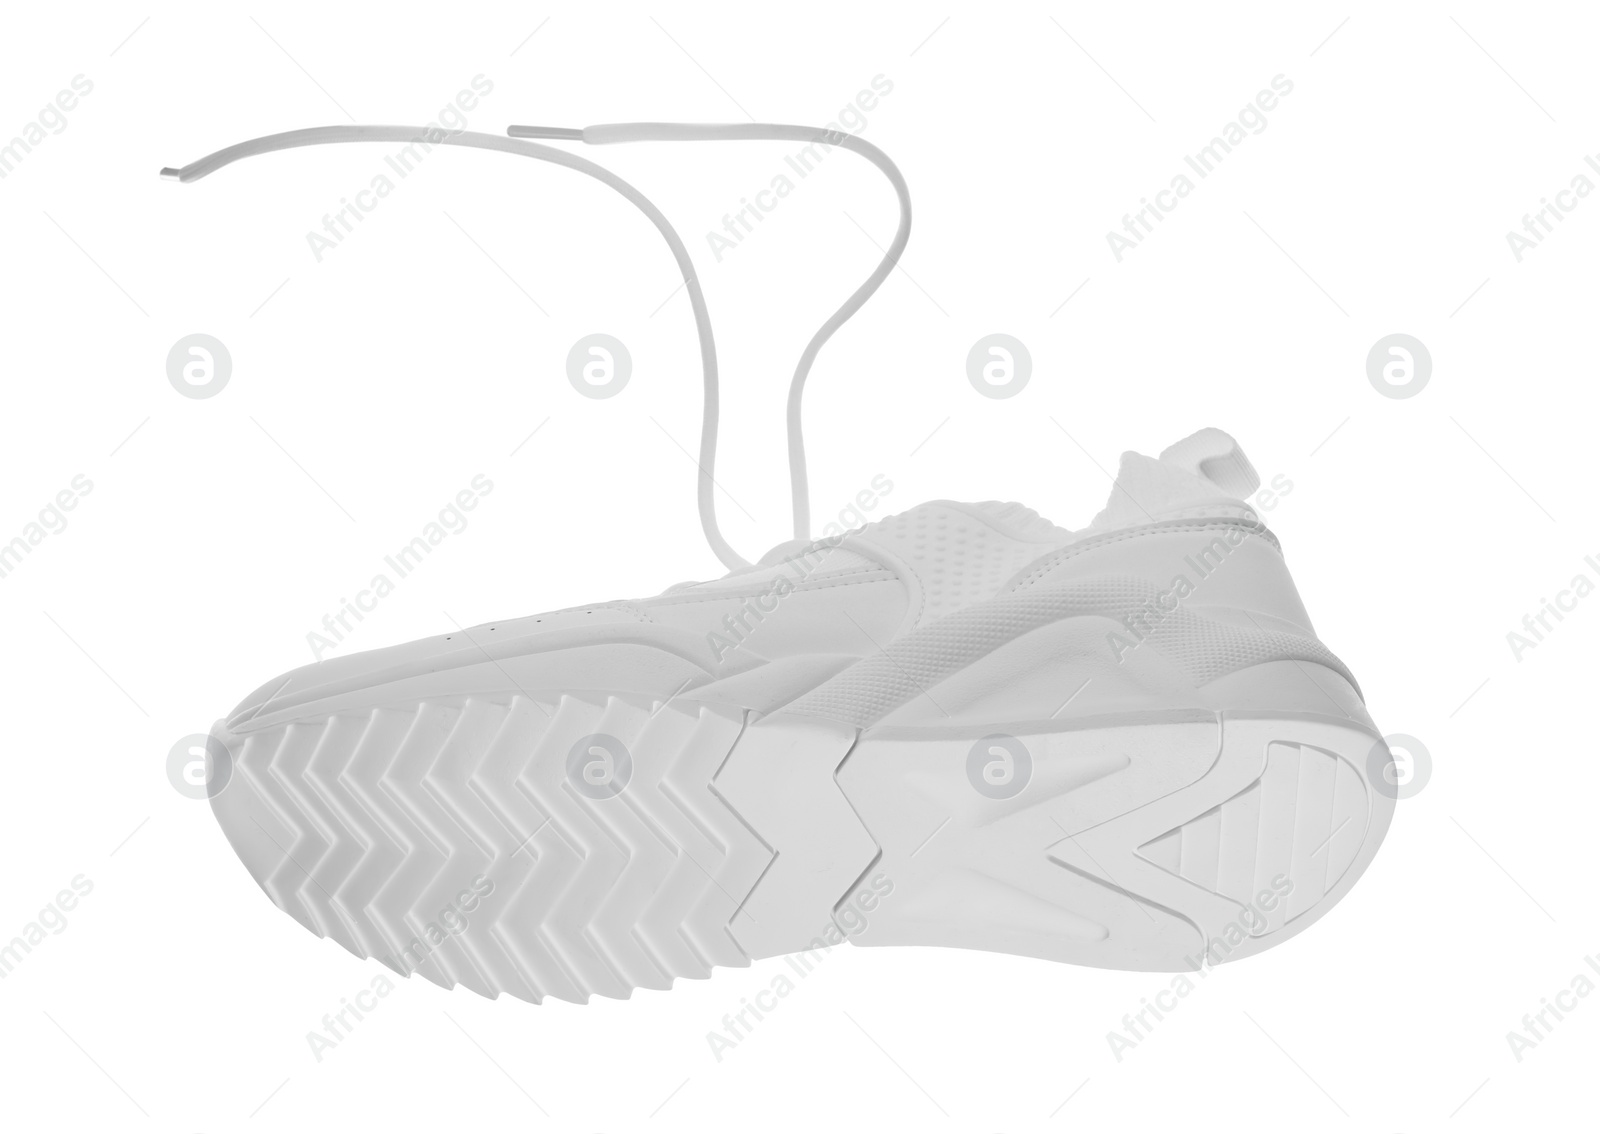 Photo of One stylish new sneaker isolated on white